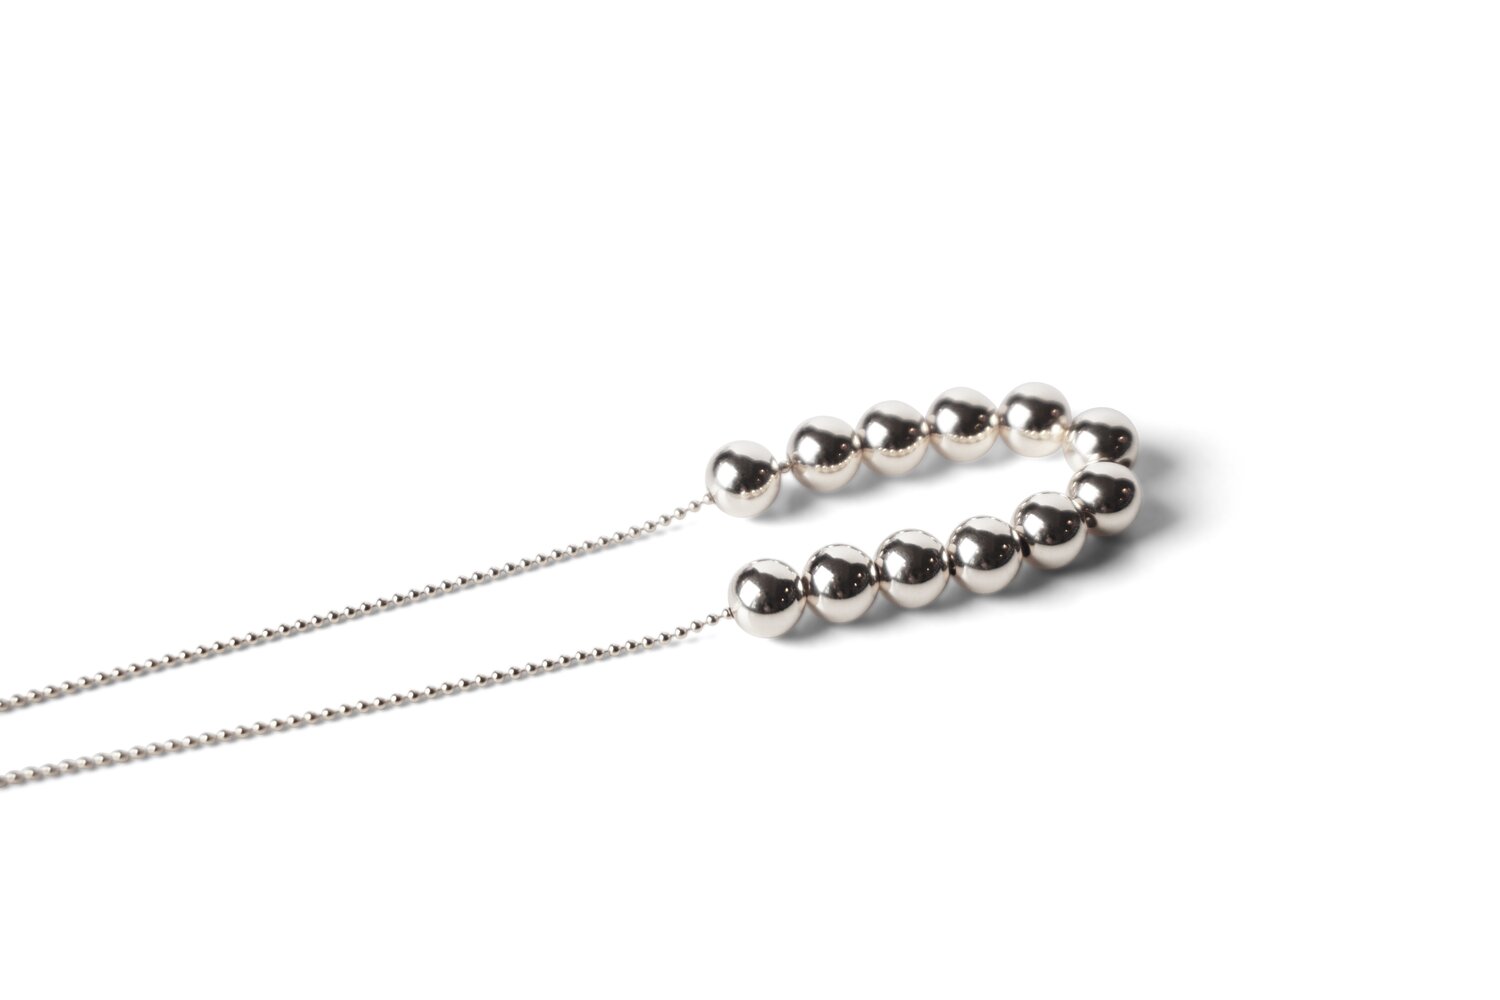 SNAKE CHAIN NECKLACE IN STERLING SILVER — CHARLOTTE CAUWE STUDIO